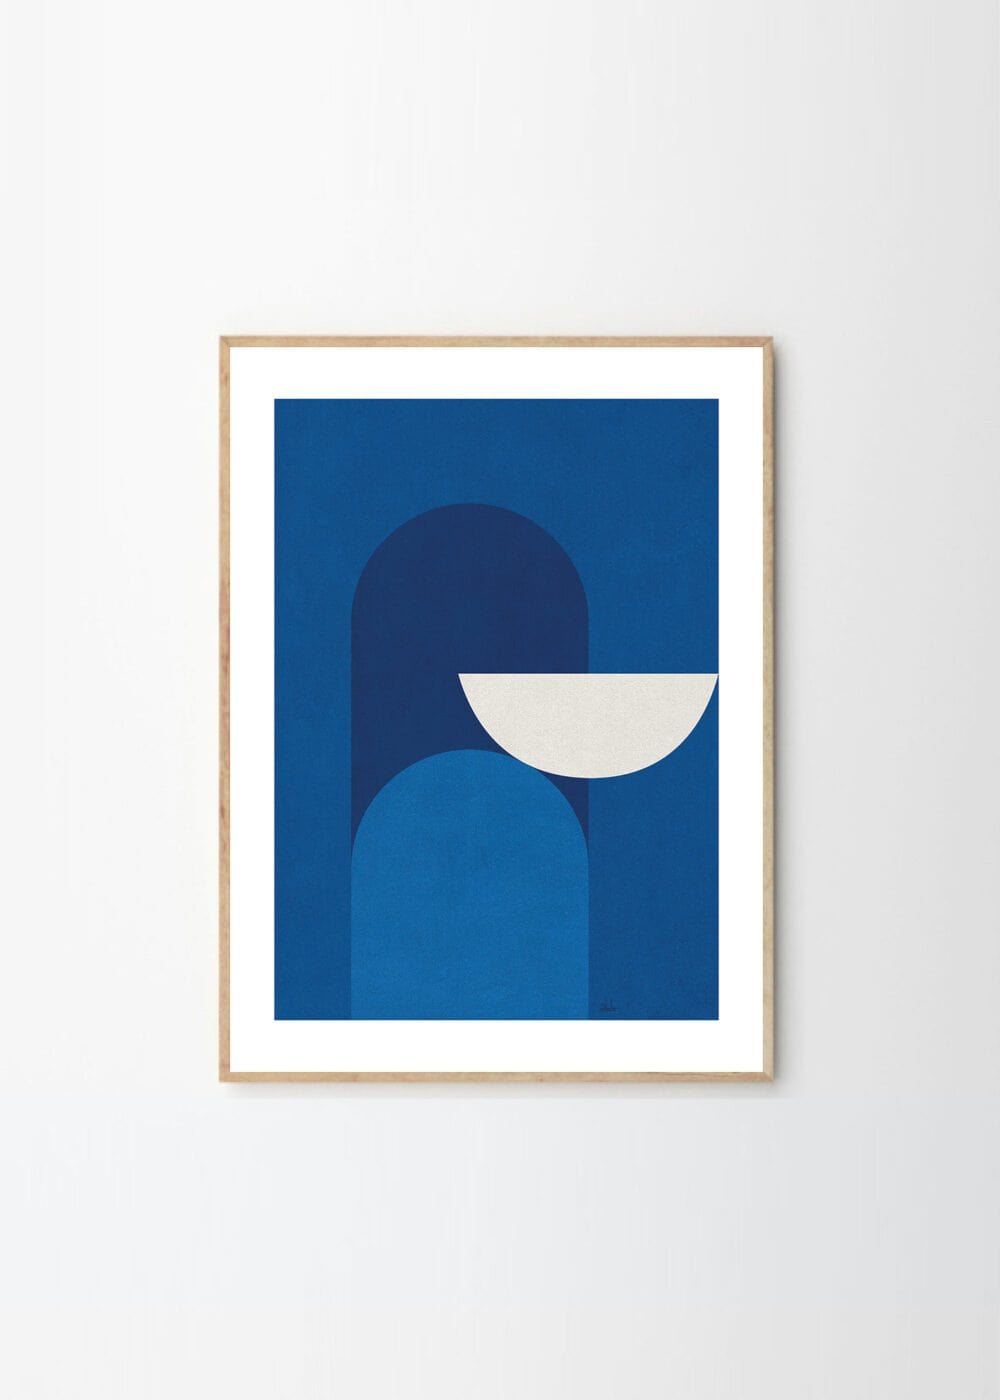 THE POSTER CLUB Poster Πόστερ, Alexandra Papadimouli, Abstract Blue (50x70cm), Μπλε, Sustainable Paper,THE POSTER CLUB